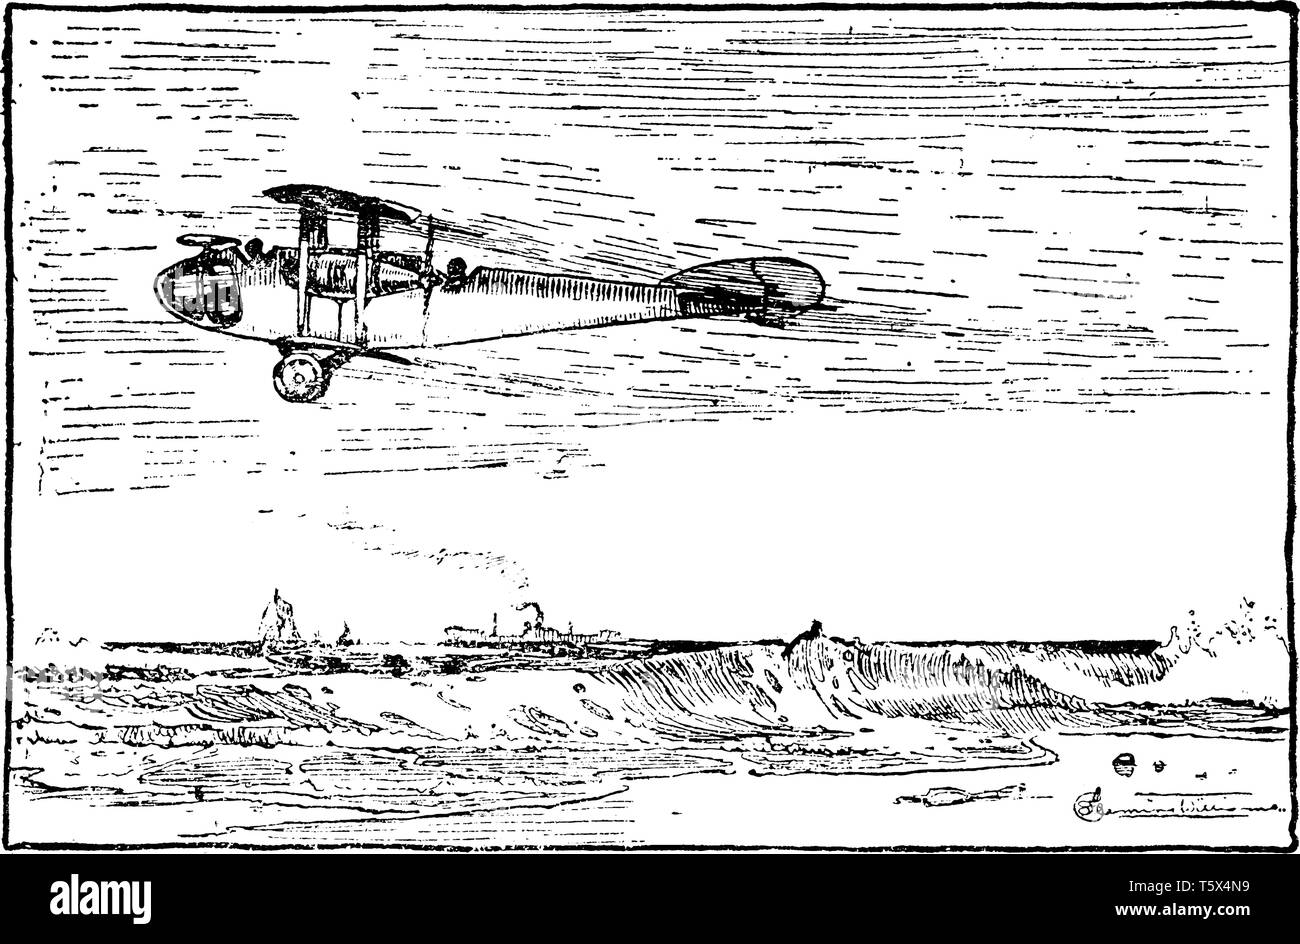 Airplane Flying above Shore in which the aerodynamics of the plane with the tail wing at the same angle as the main body, vintage line drawing or engr Stock Vector